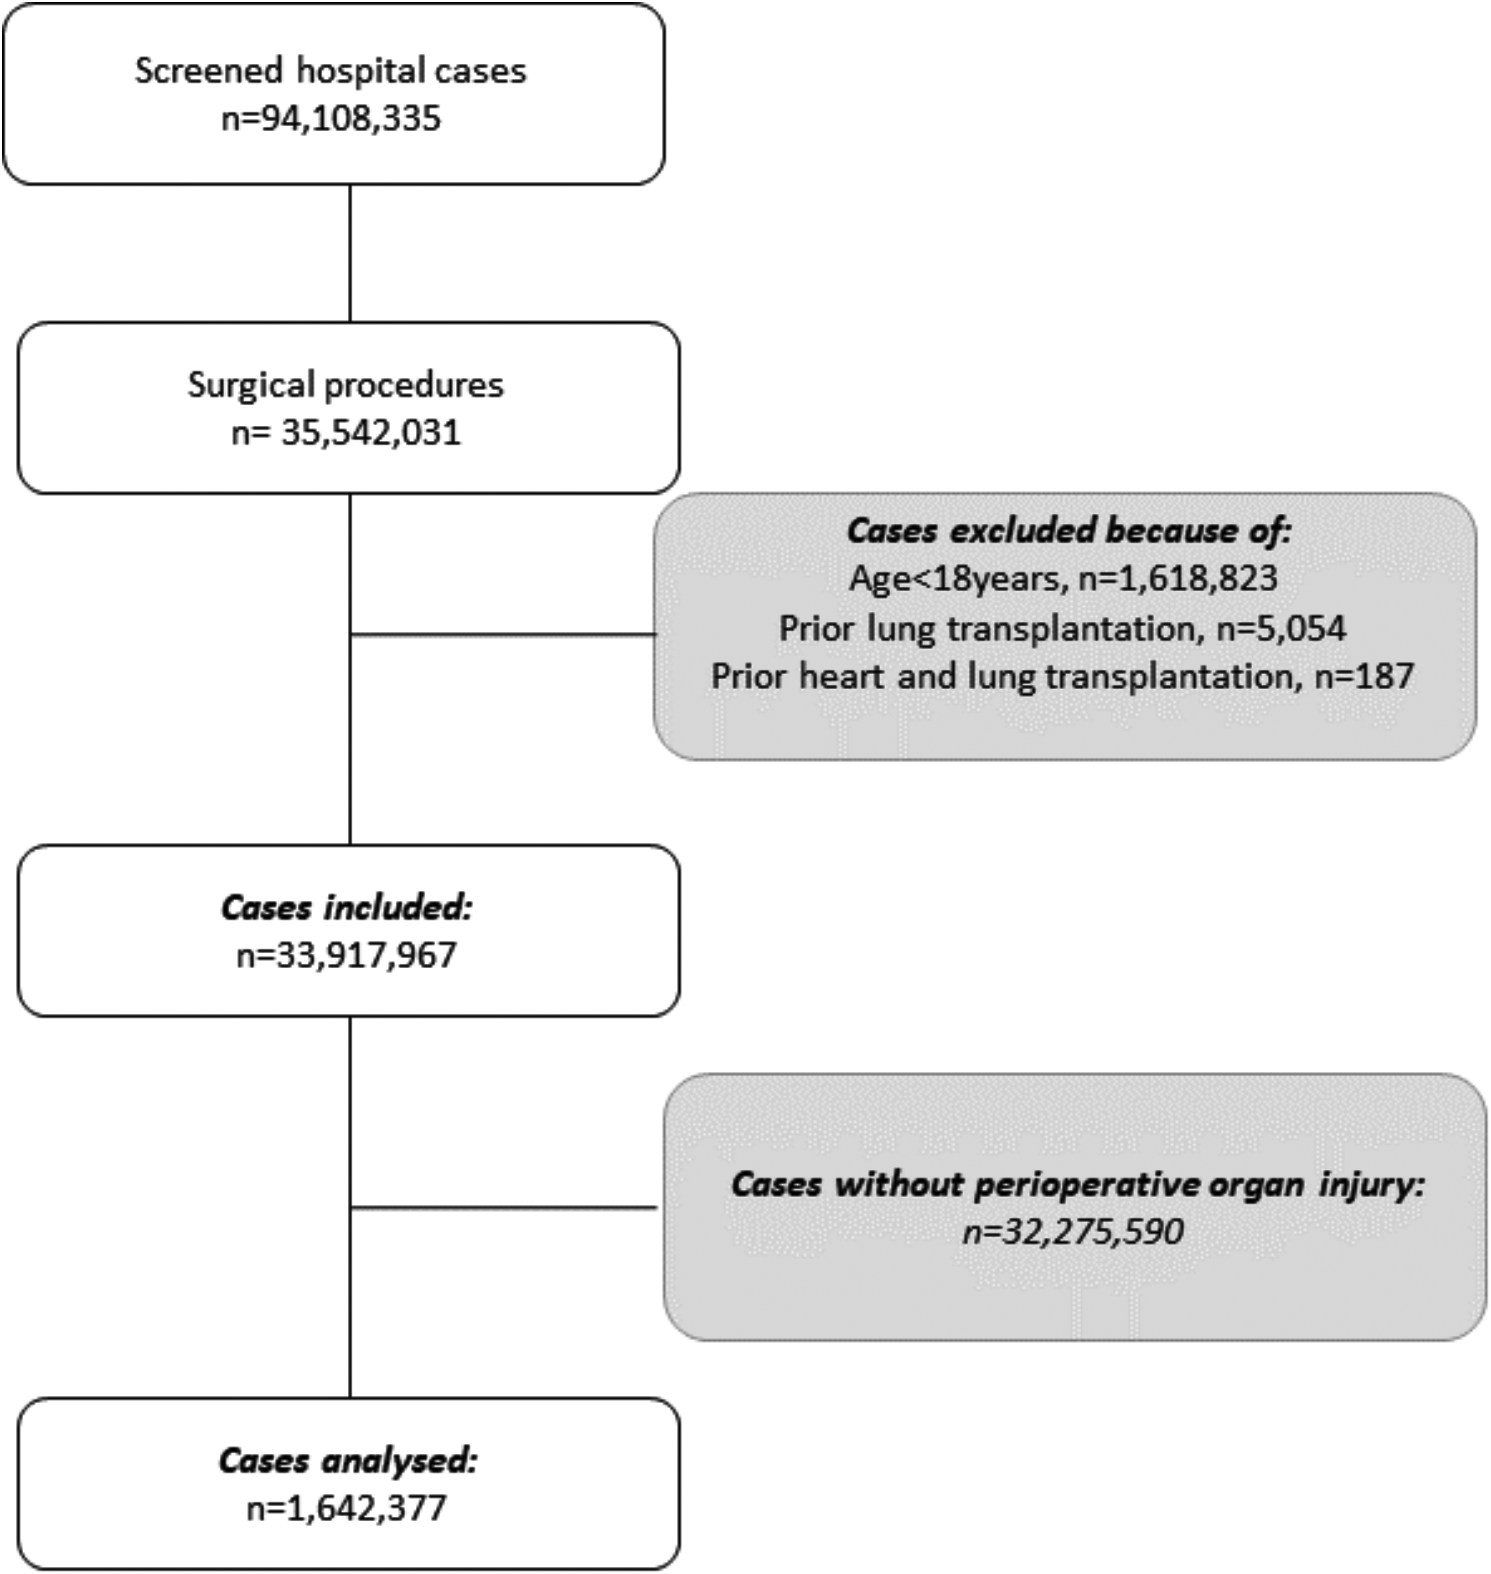 Chronic obstructive pulmonary disease affects outcome in surgical patients with perioperative organ injury: a retrospective cohort study in Germany